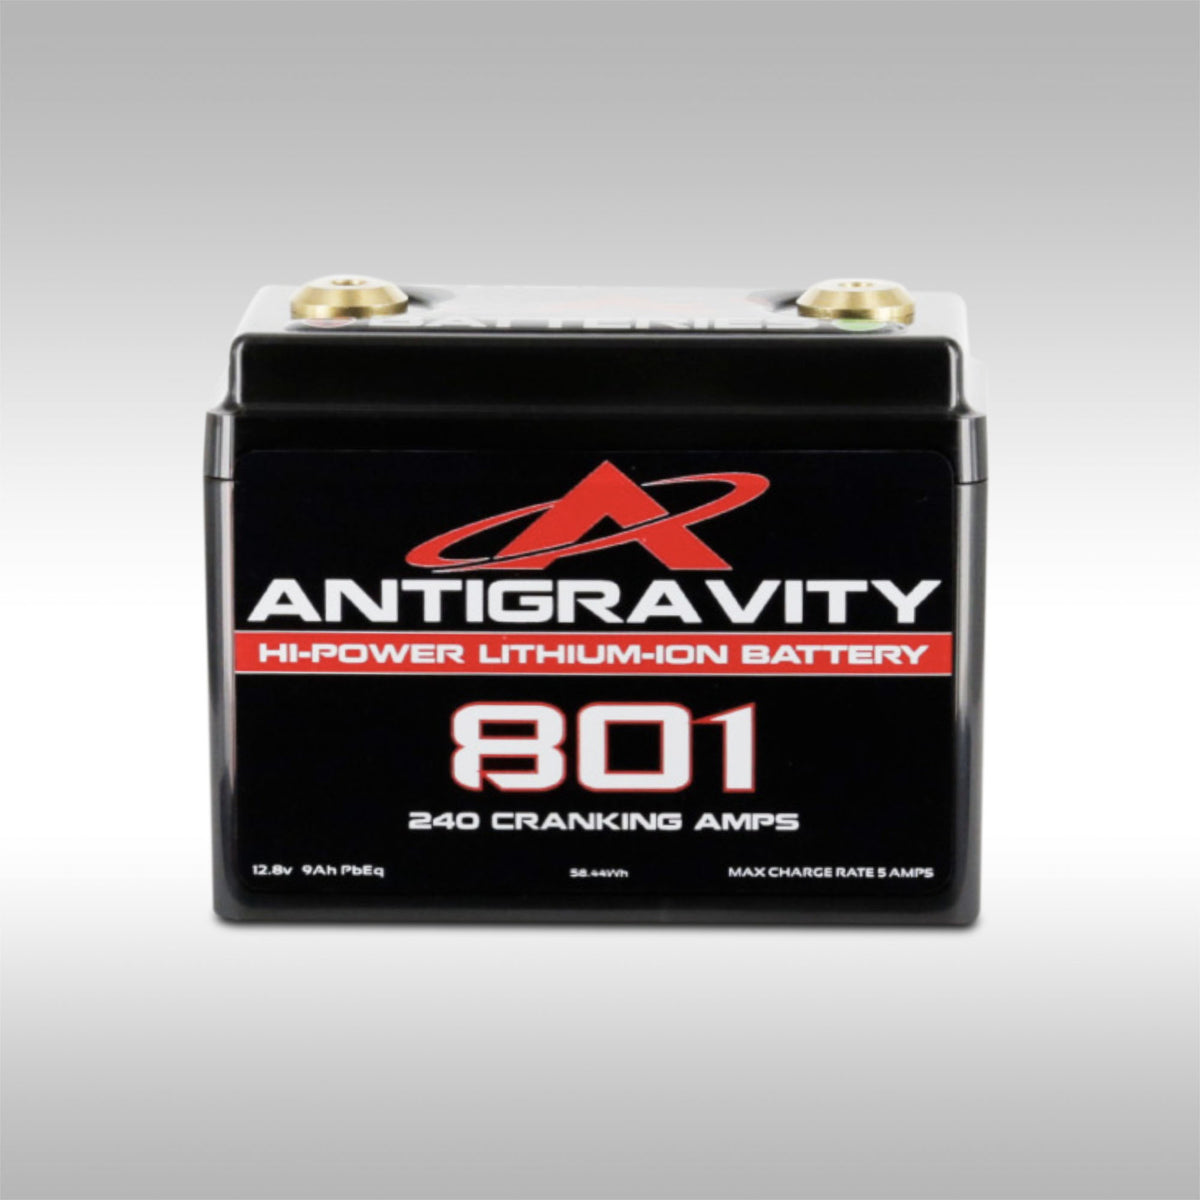 Antigravity Battery AG-801 lithium ion battery with 240 cranking amps. Straight on view.